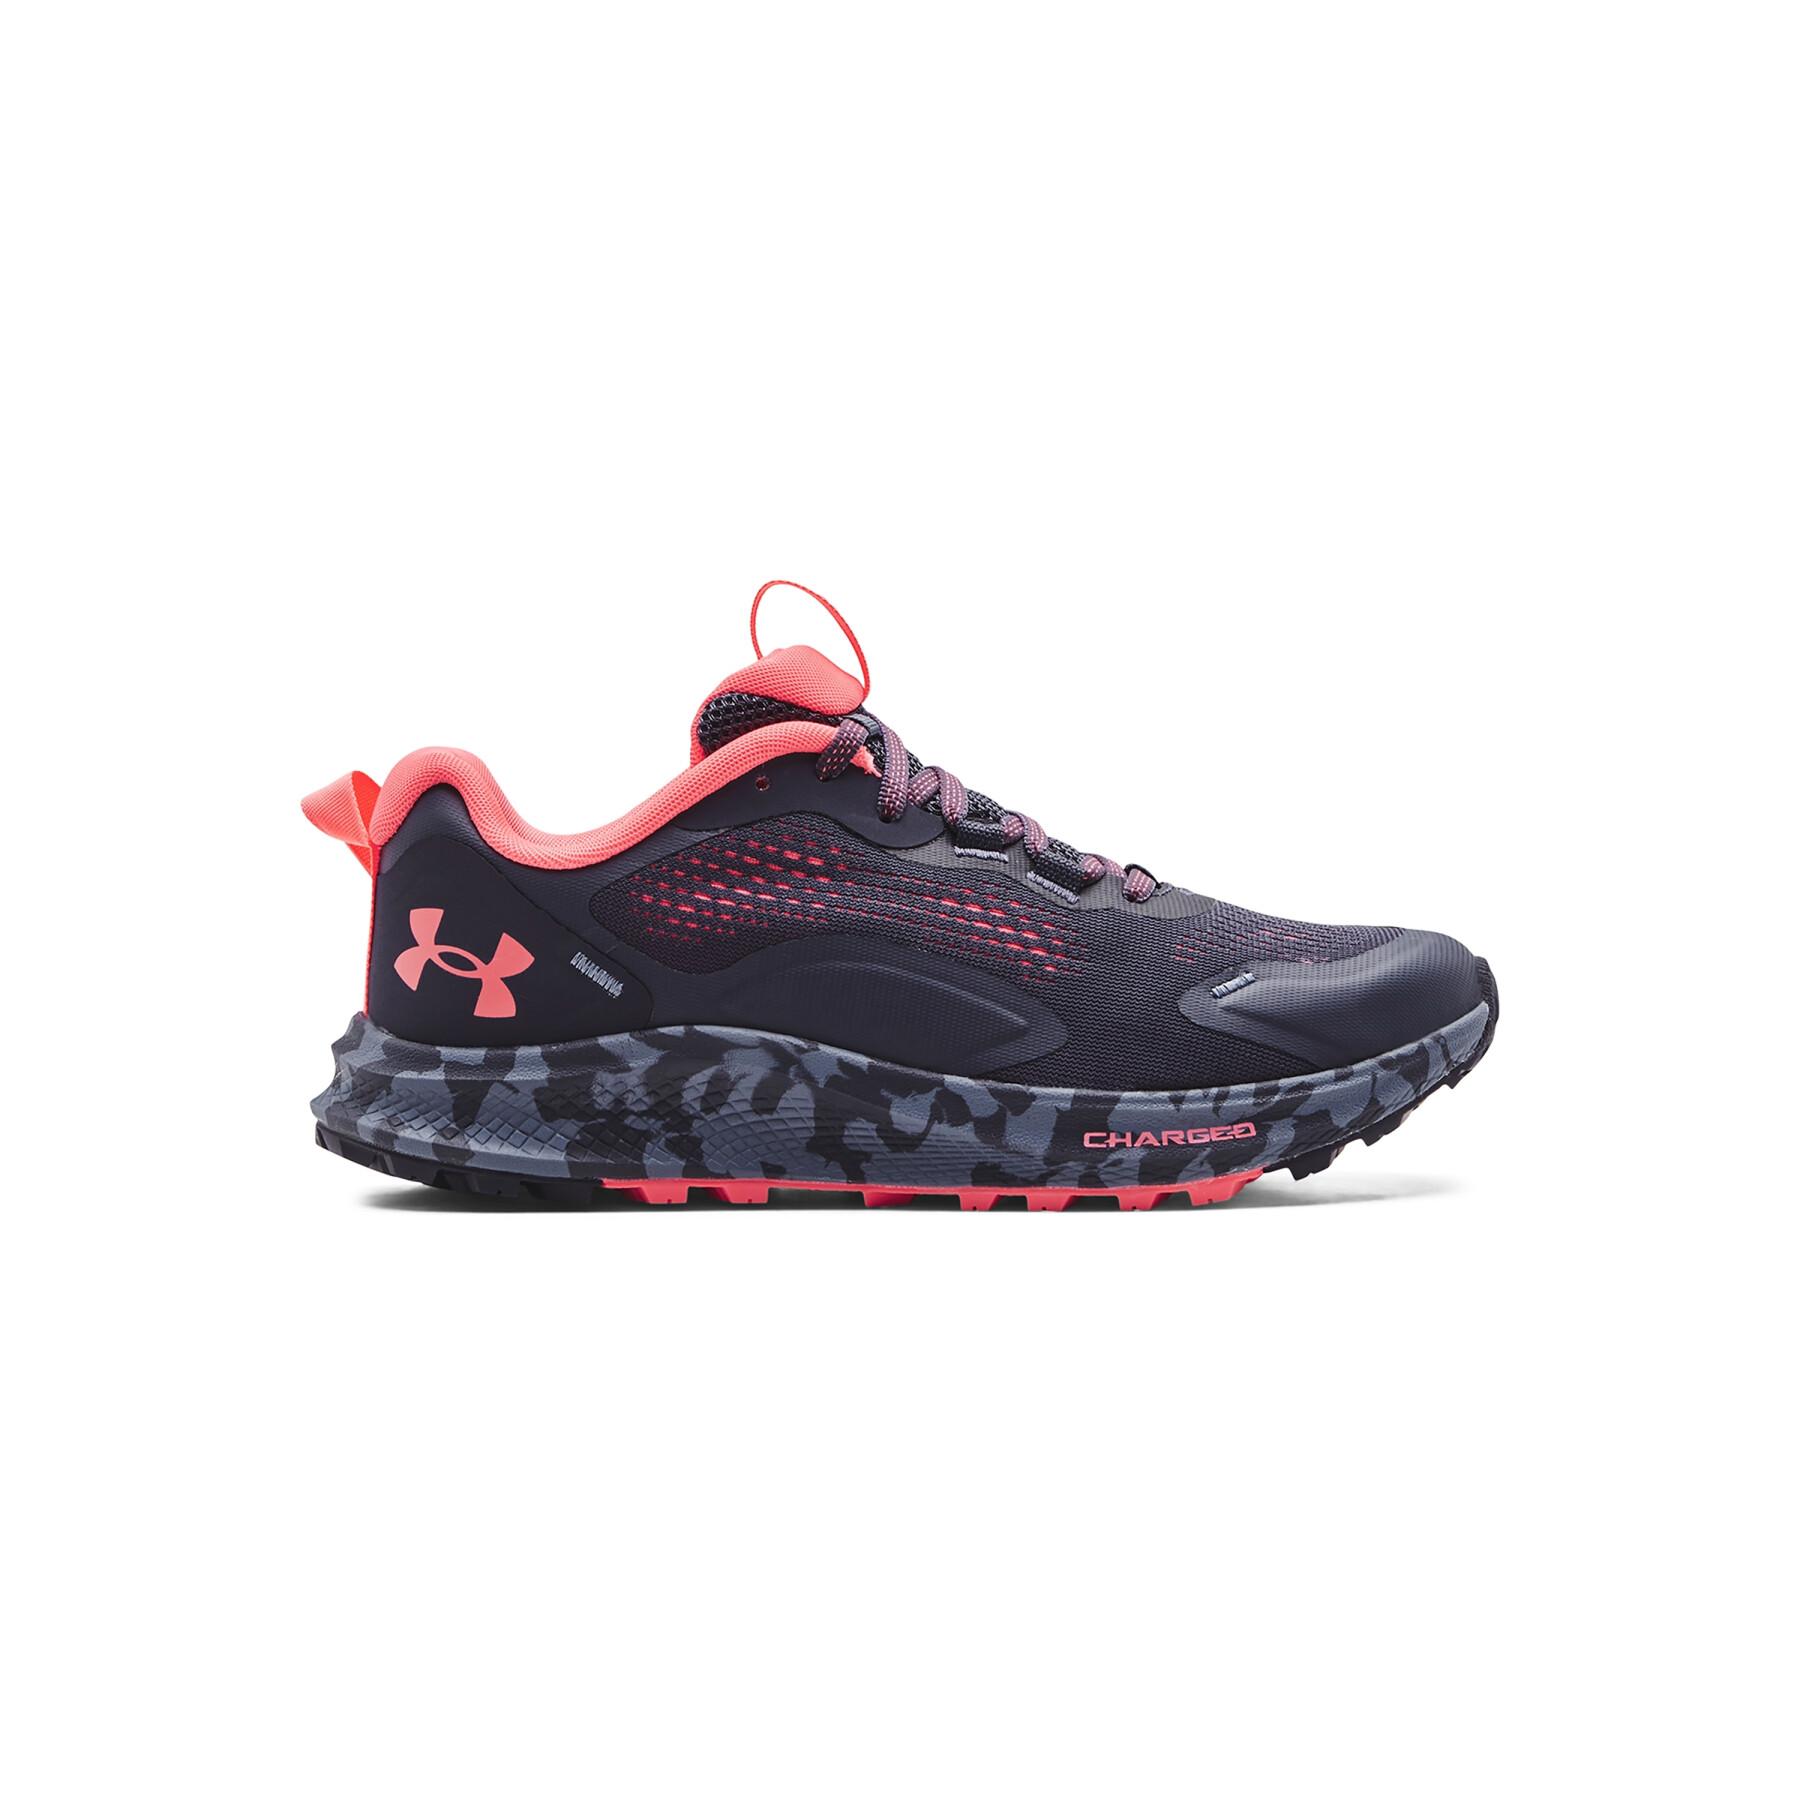 Zapatillas de trail para mujer Under Armour Charged Bandit TR2